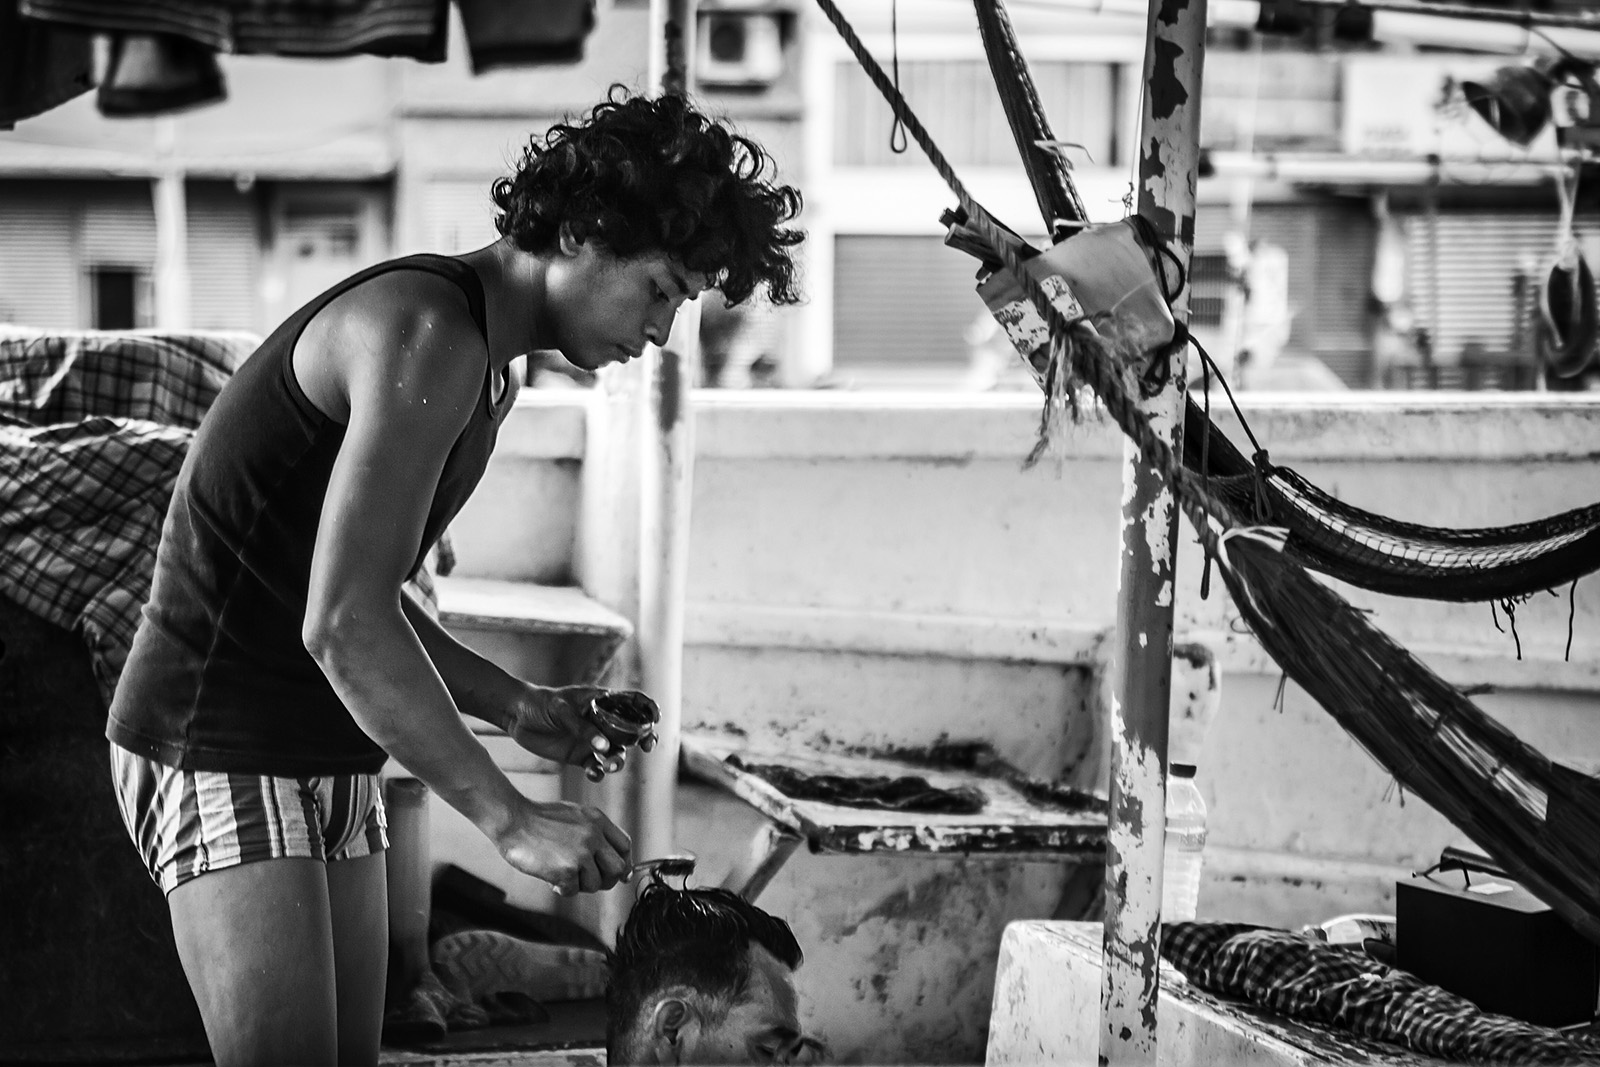 Fishermen in Nanfang-Ao, Taiwan end their day by styling each other's hair. They live their lives on the boats, where they eat and sleep, at sea and in port.